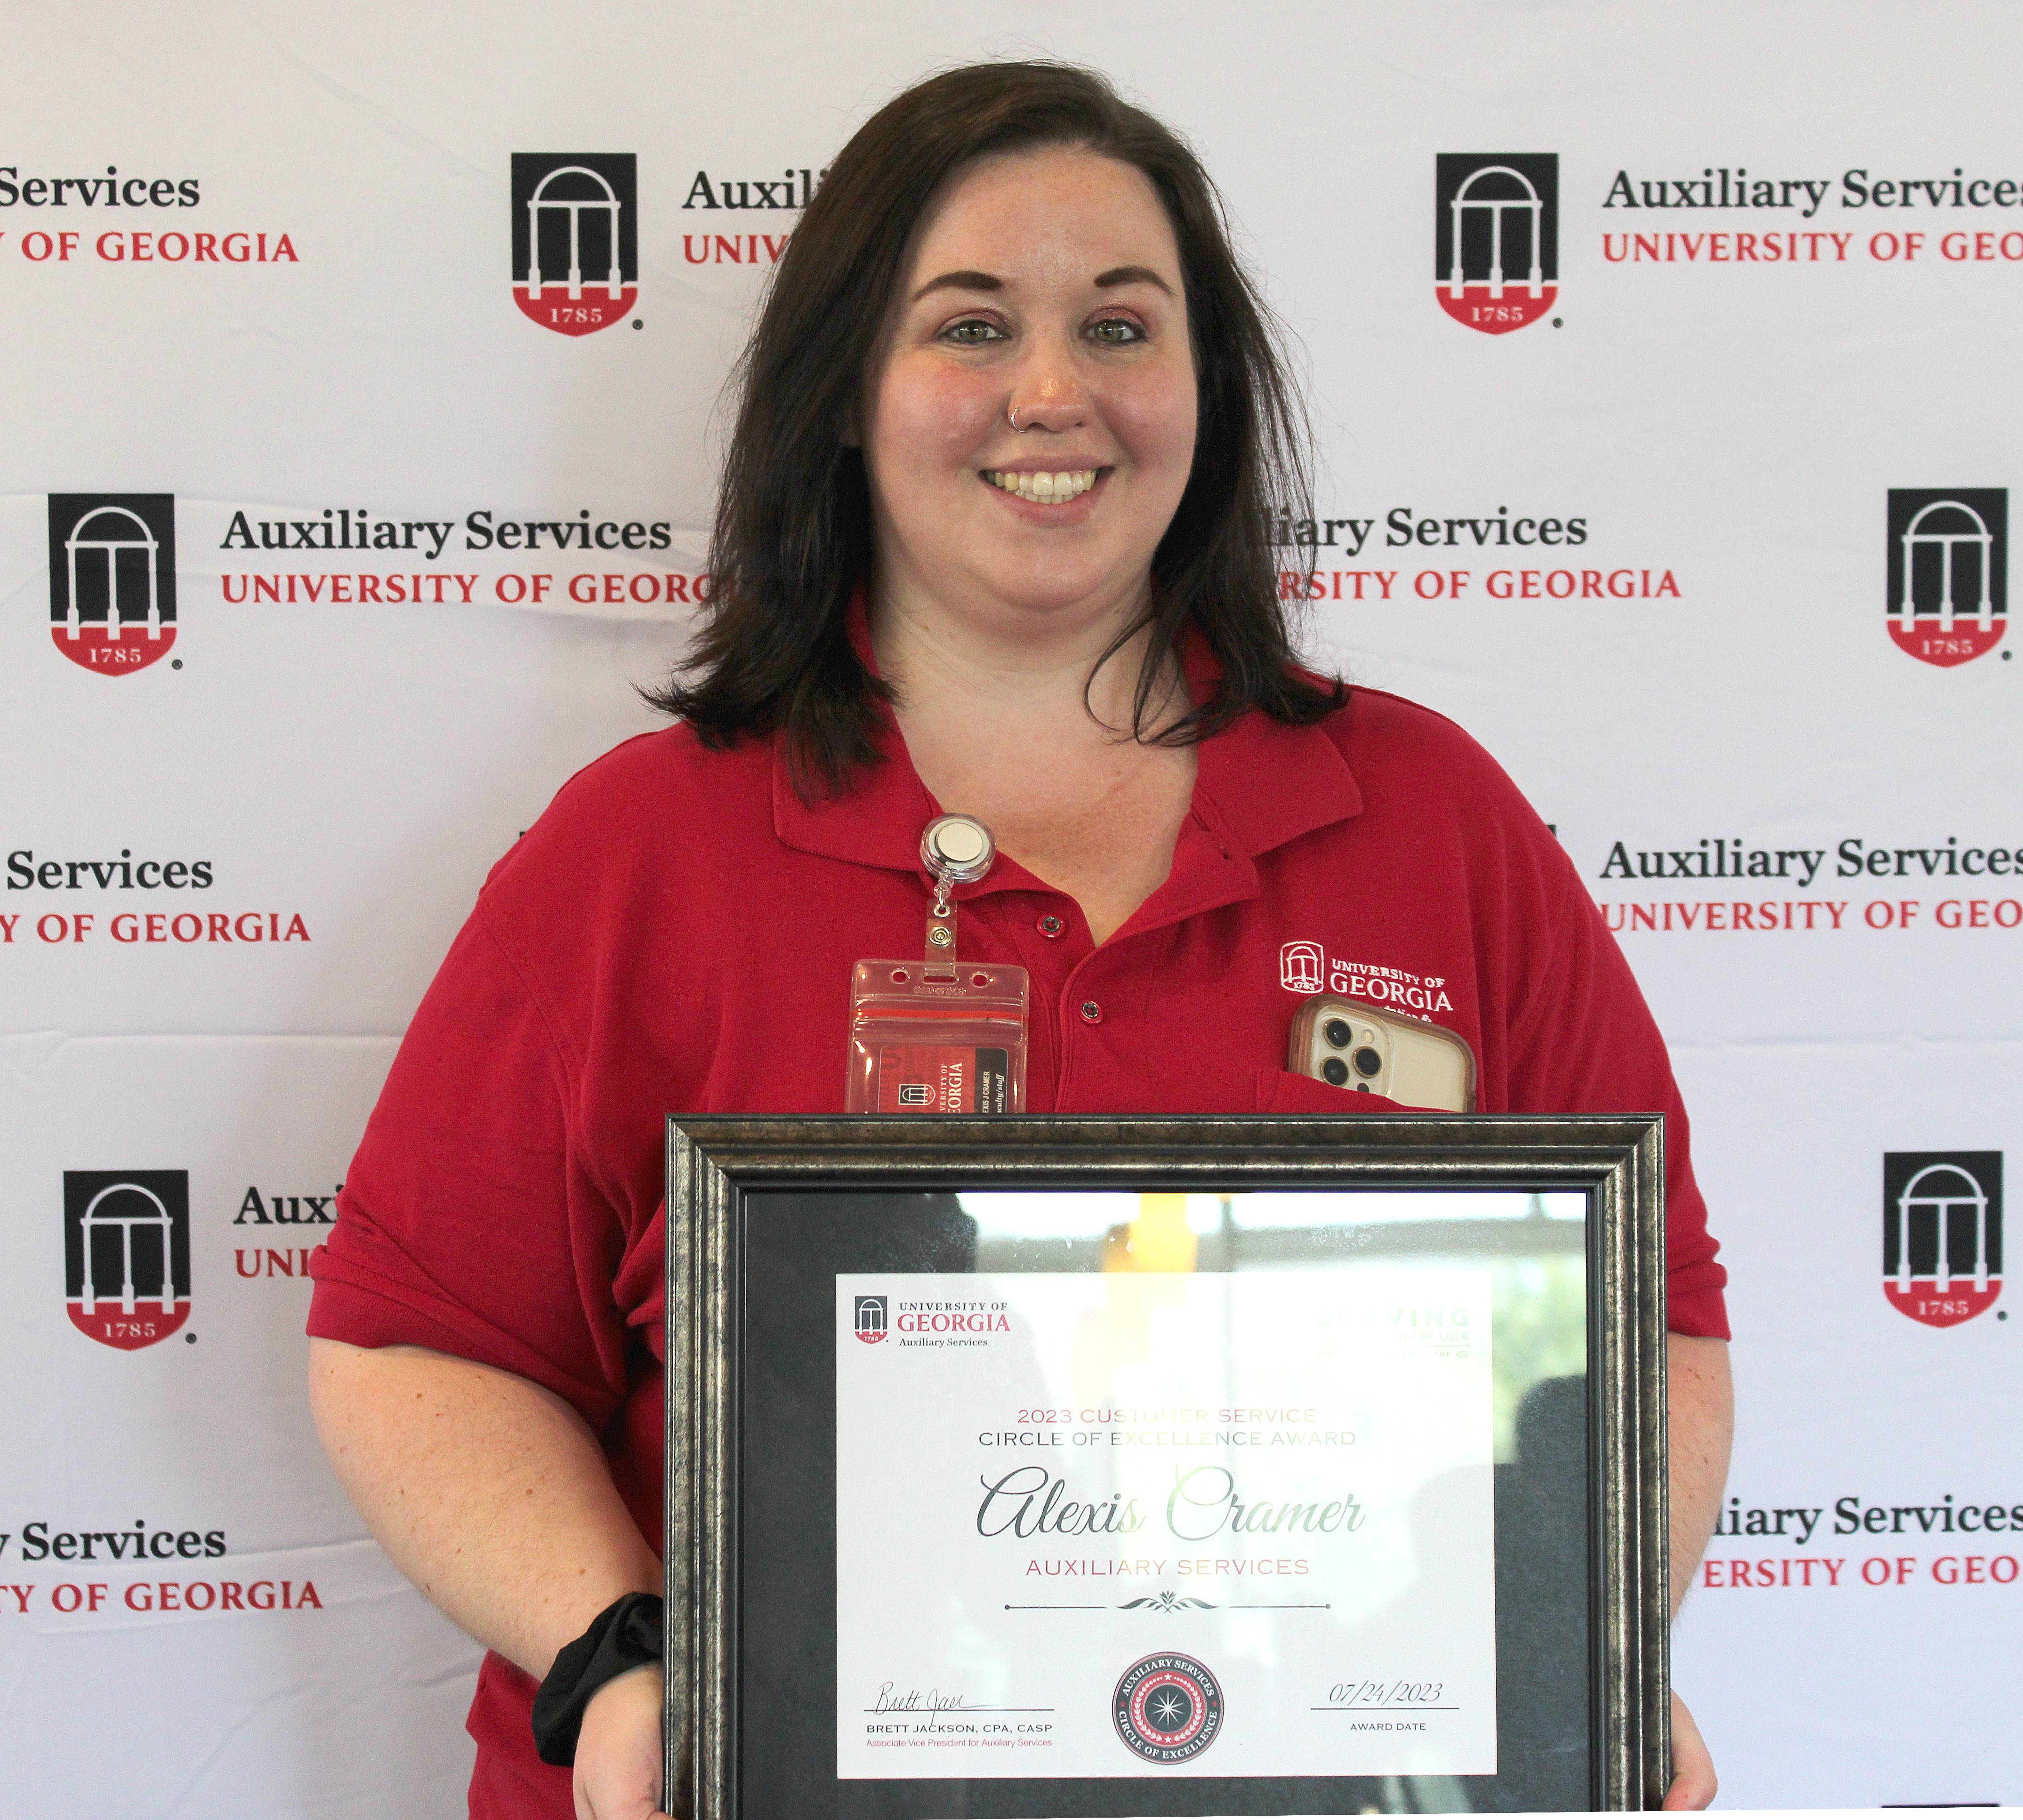 A photograph of a woman with shoulder-length brown hair wearing a red polo shirt and holding a framed certificate.